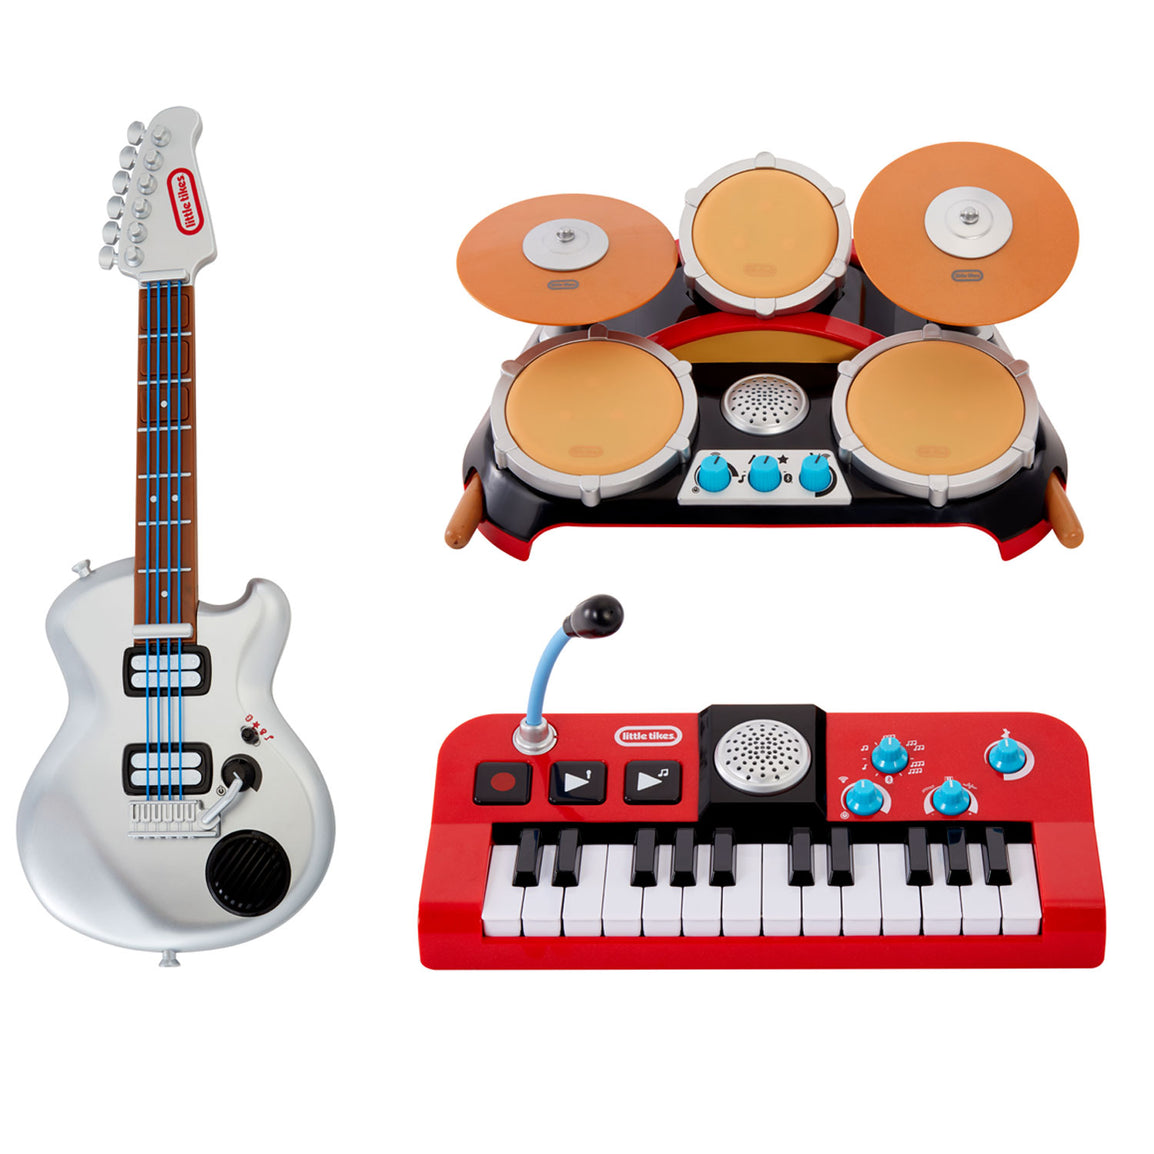 My Real Jam™ First Concert Set with Drums, Keyboard and Electric Guitar - Official Little Tikes Website